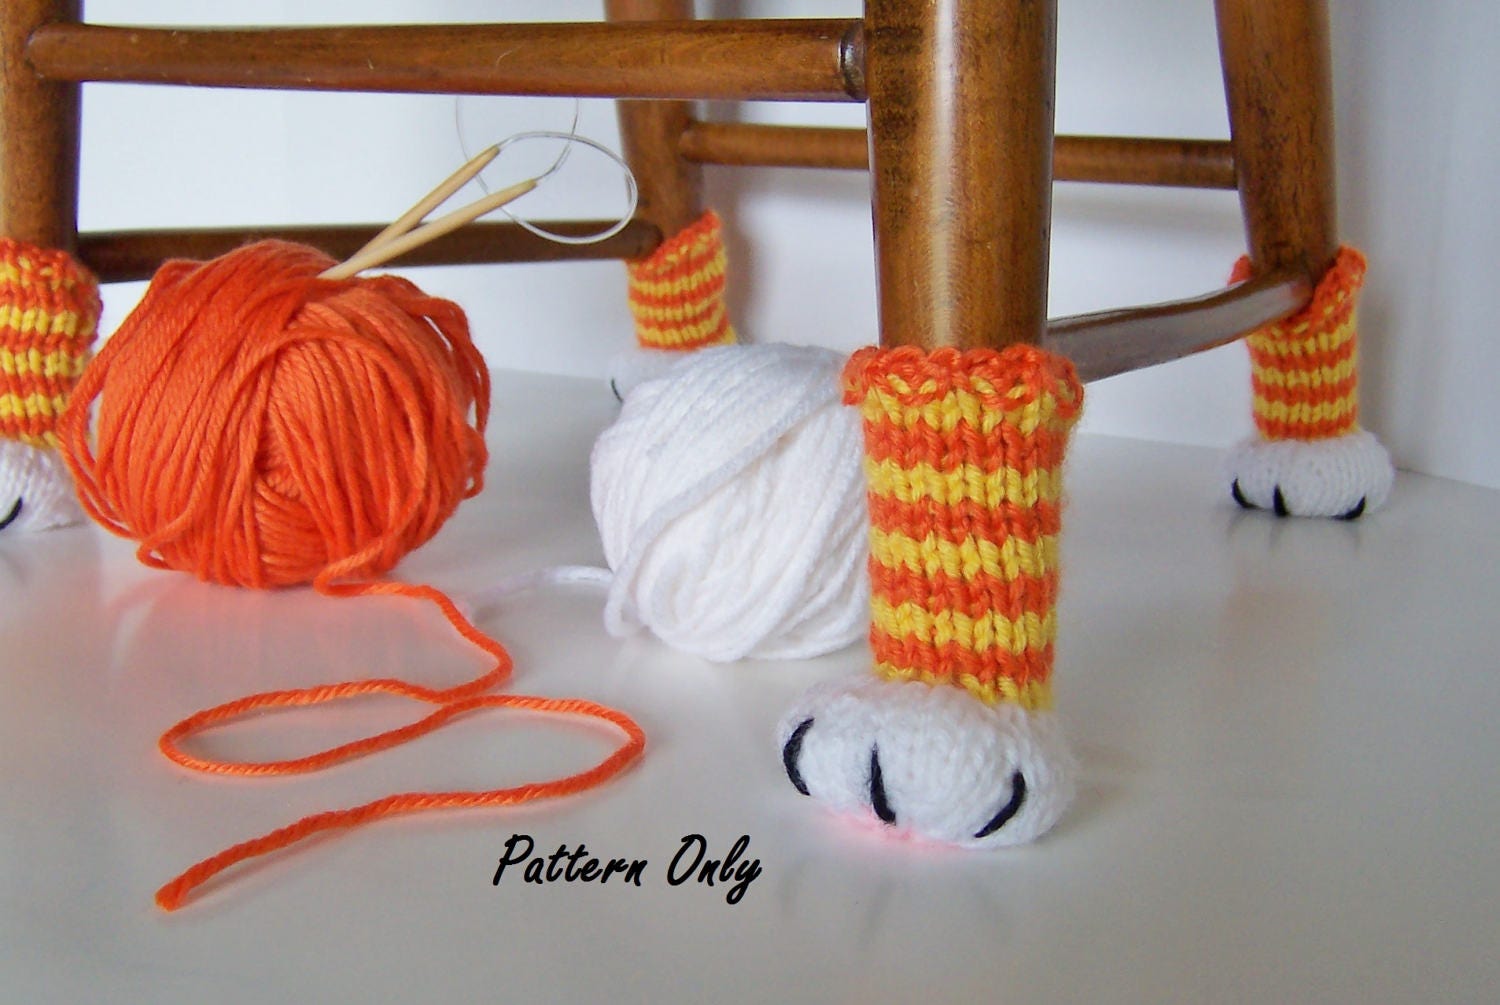 Currently making cat paw chair socks, and I'm dying over how cute